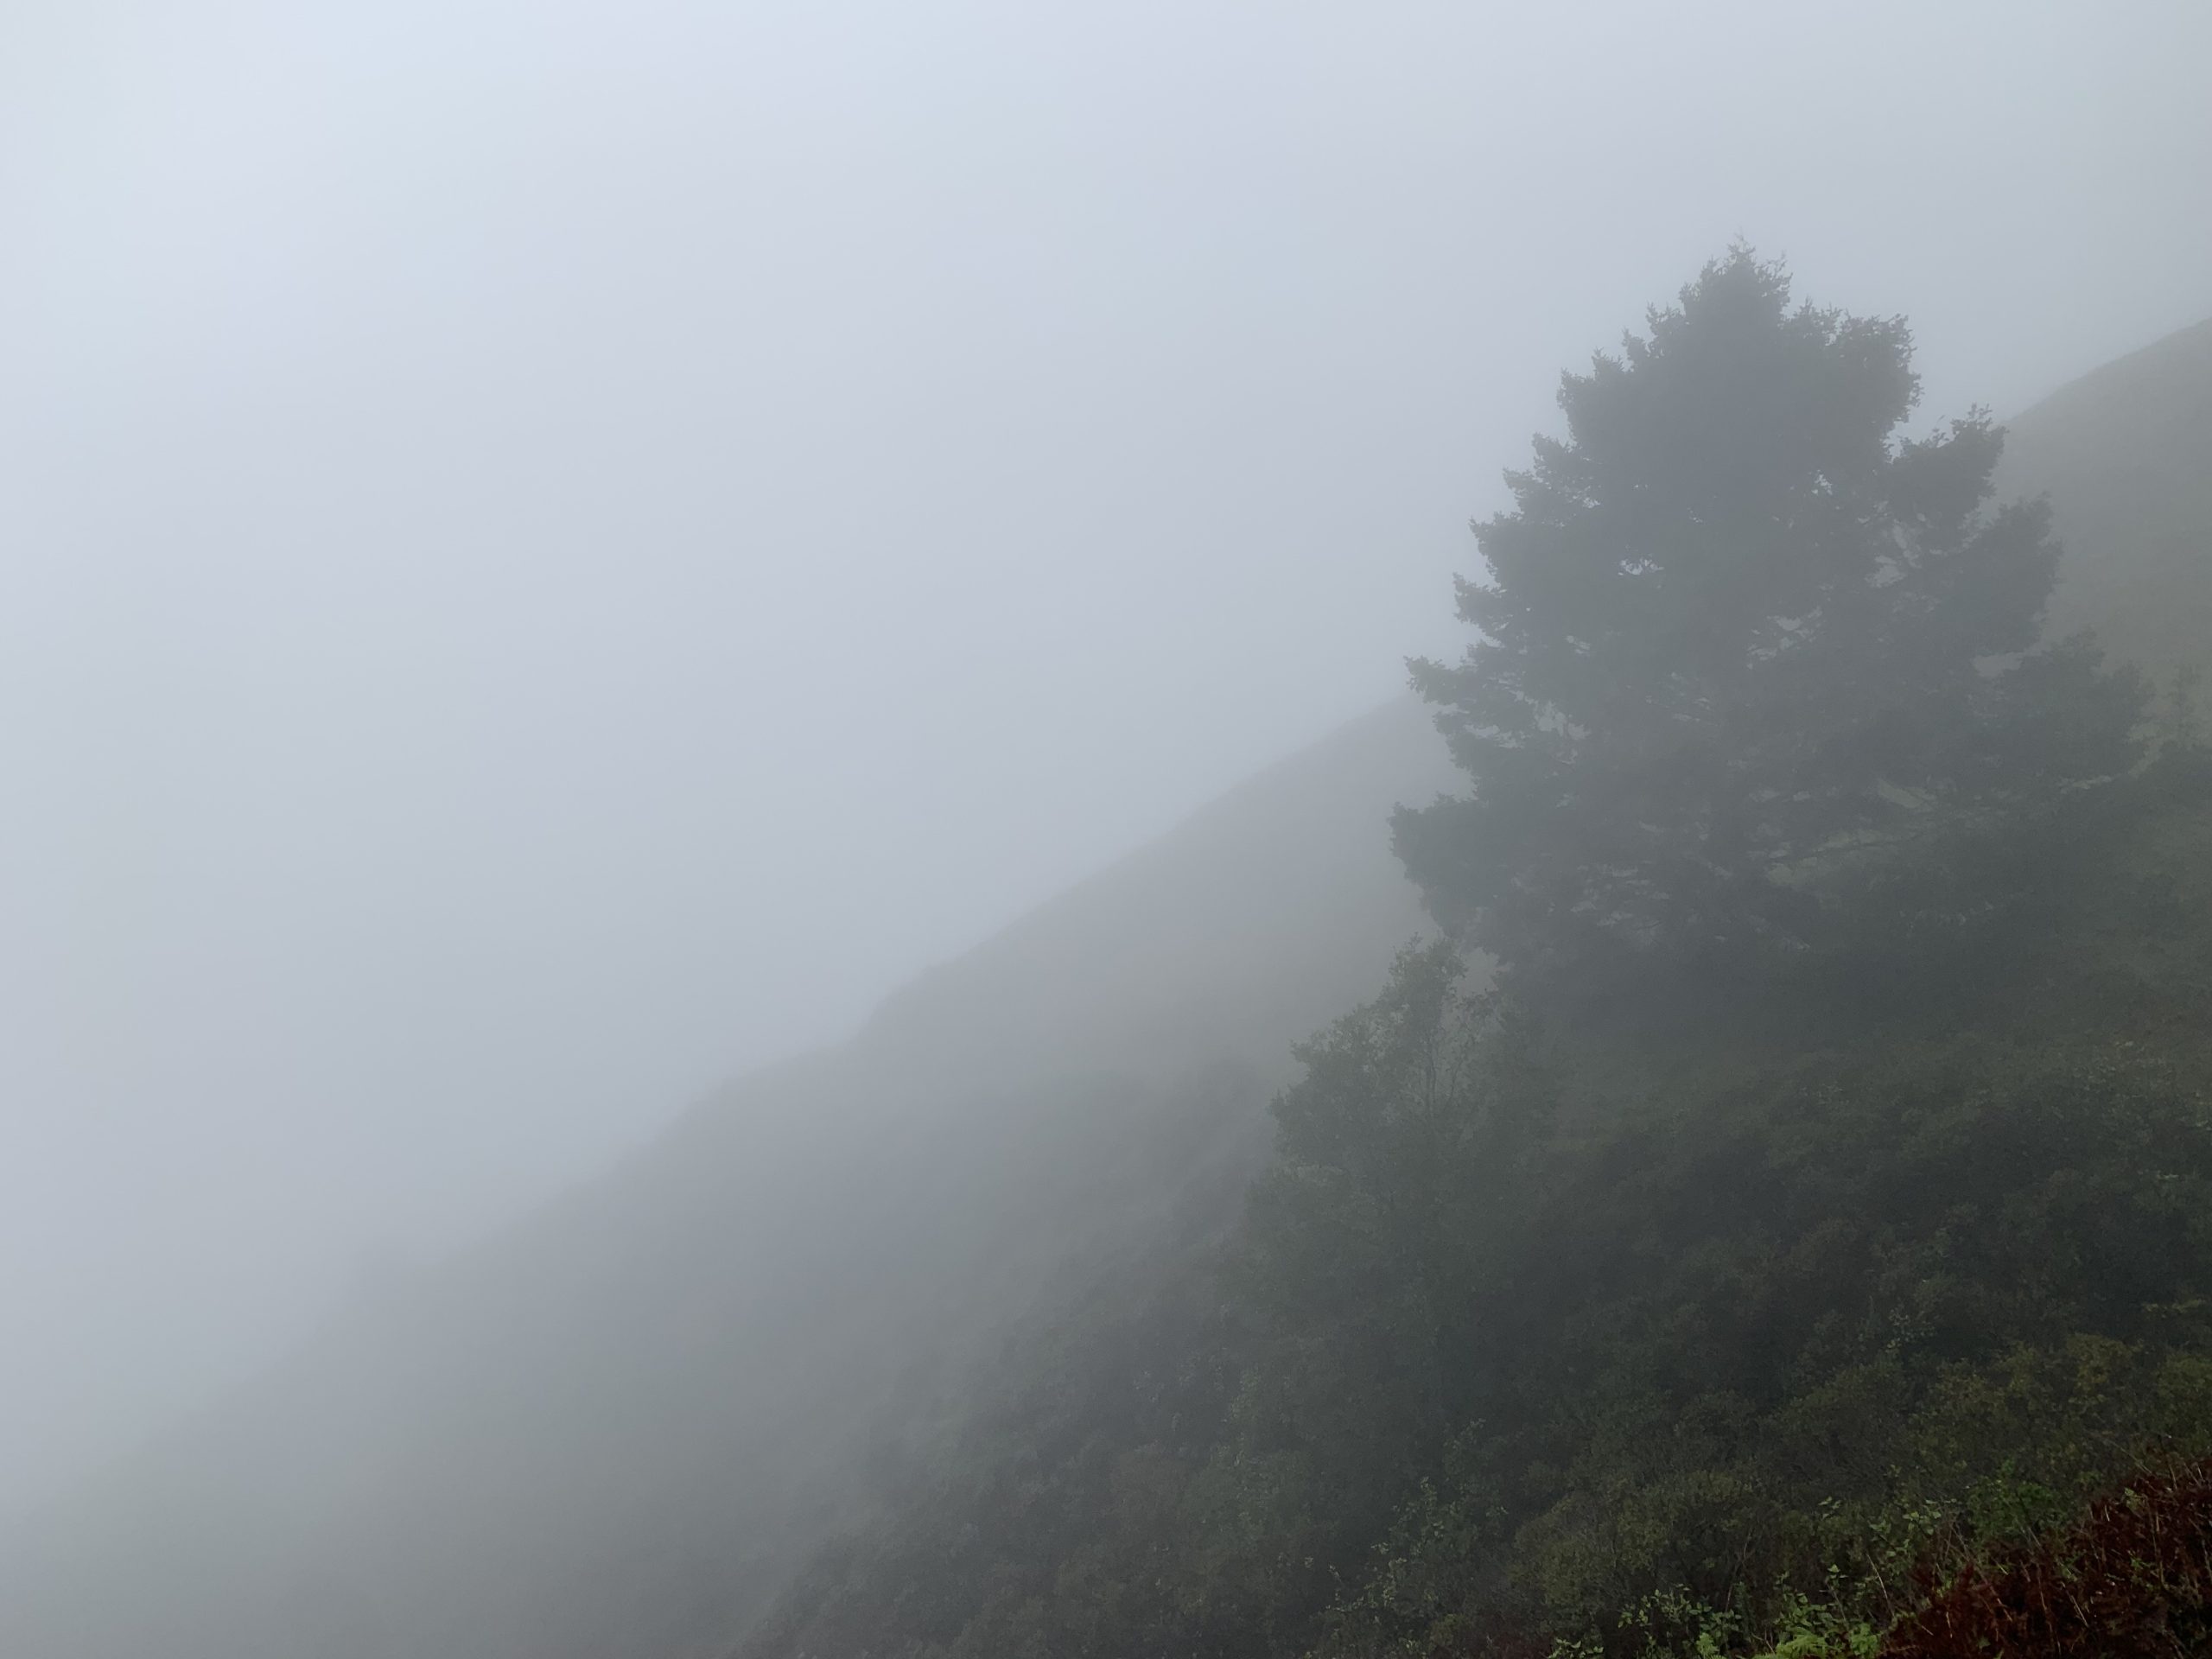 Like a foggy day that undermines a hike, vague language creates confusion, ambiguity, and conflict